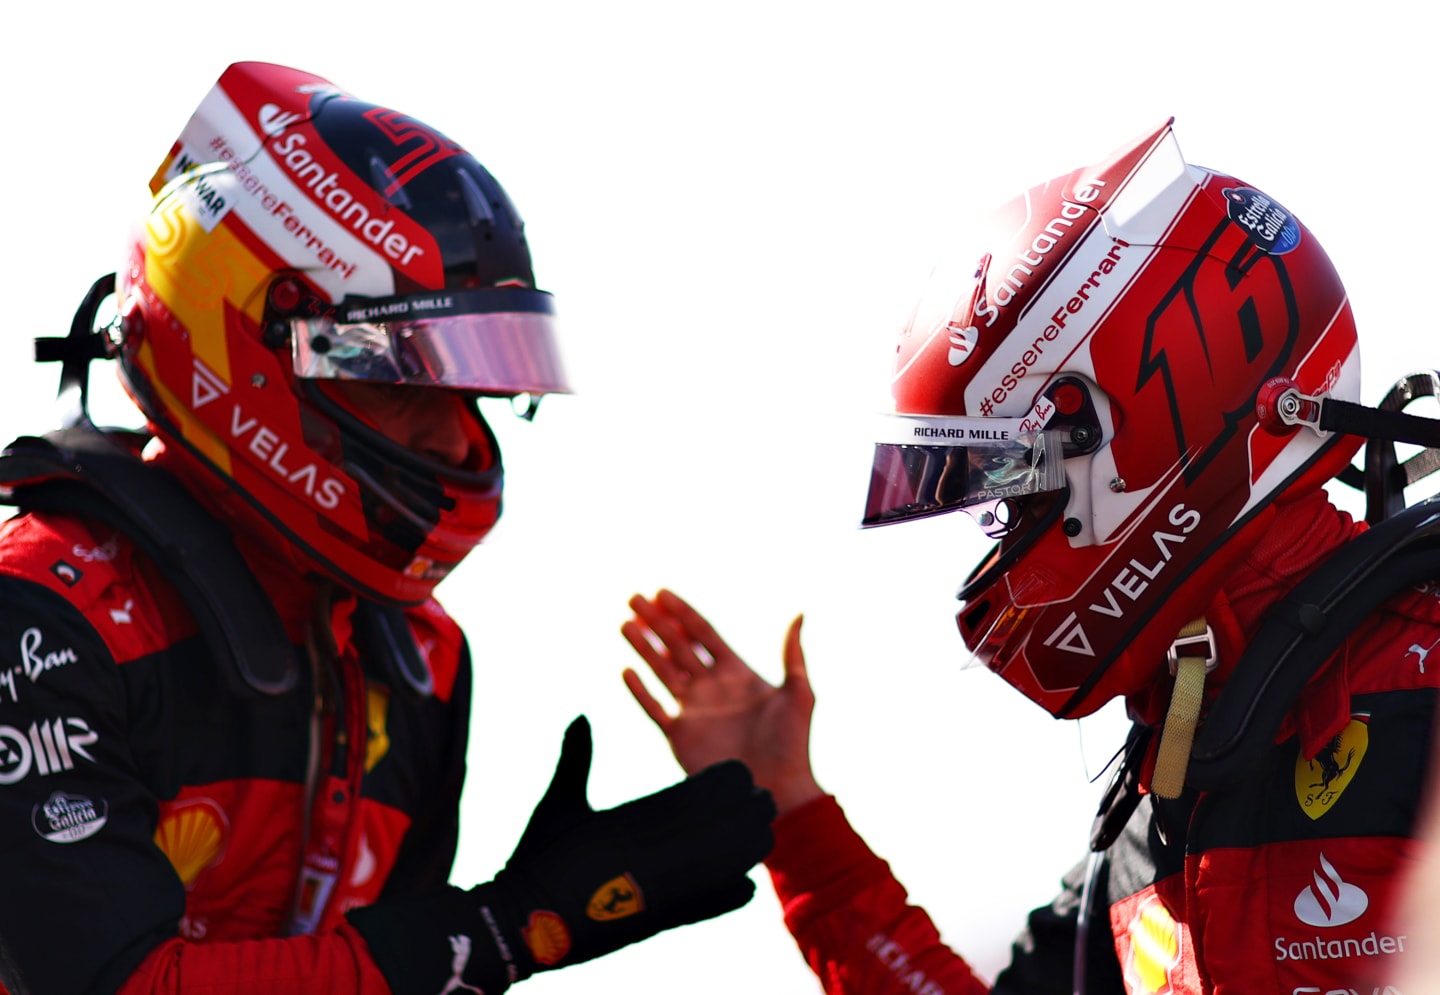 MIAMI, FLORIDA - MAY 07: Pole position qualifier Charles Leclerc of Monaco and Ferrari and Second placed qualifier Carlos Sainz of Spain and Ferrari celebrate in parc ferme during qualifying ahead of the F1 Grand Prix of Miami at the Miami International Autodrome on May 07, 2022 in Miami, Florida. (Photo by Dan Istitene - Formula 1/Formula 1 via Getty Images)